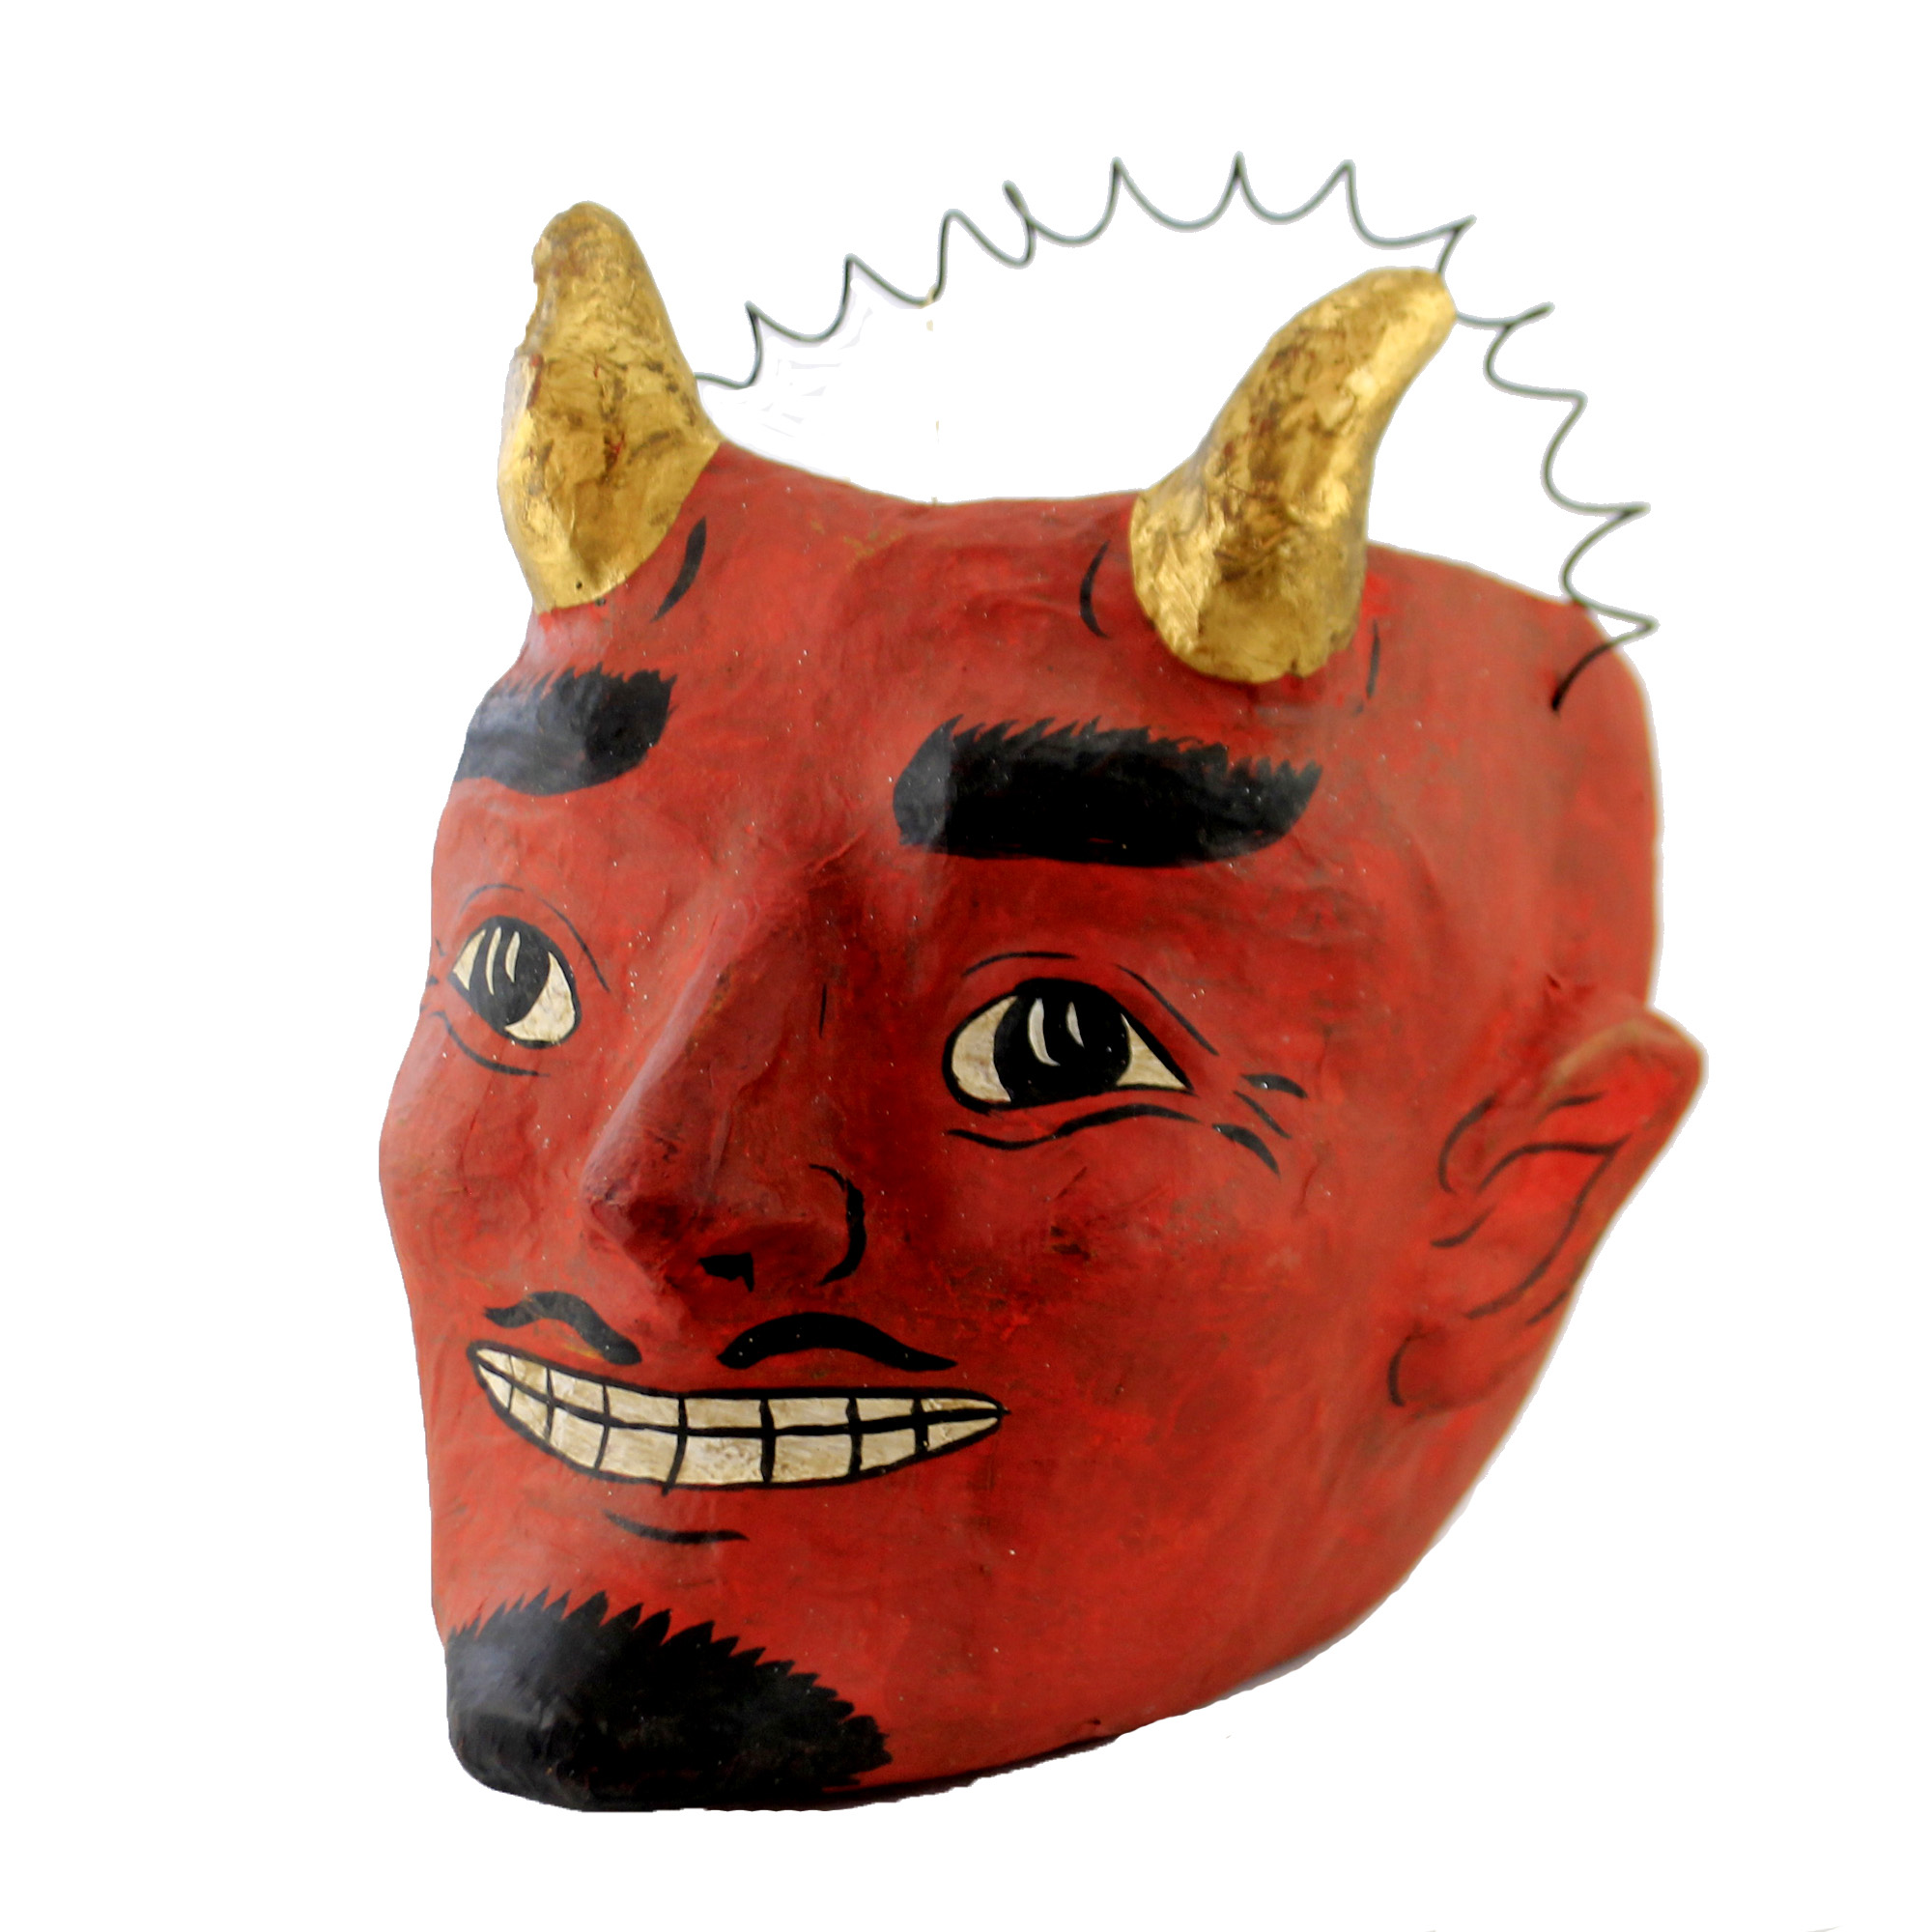 Cody Foster Vintage Style Devil Large Paper Mache Candy Bucket Halloween Pm929b - image 1 of 3